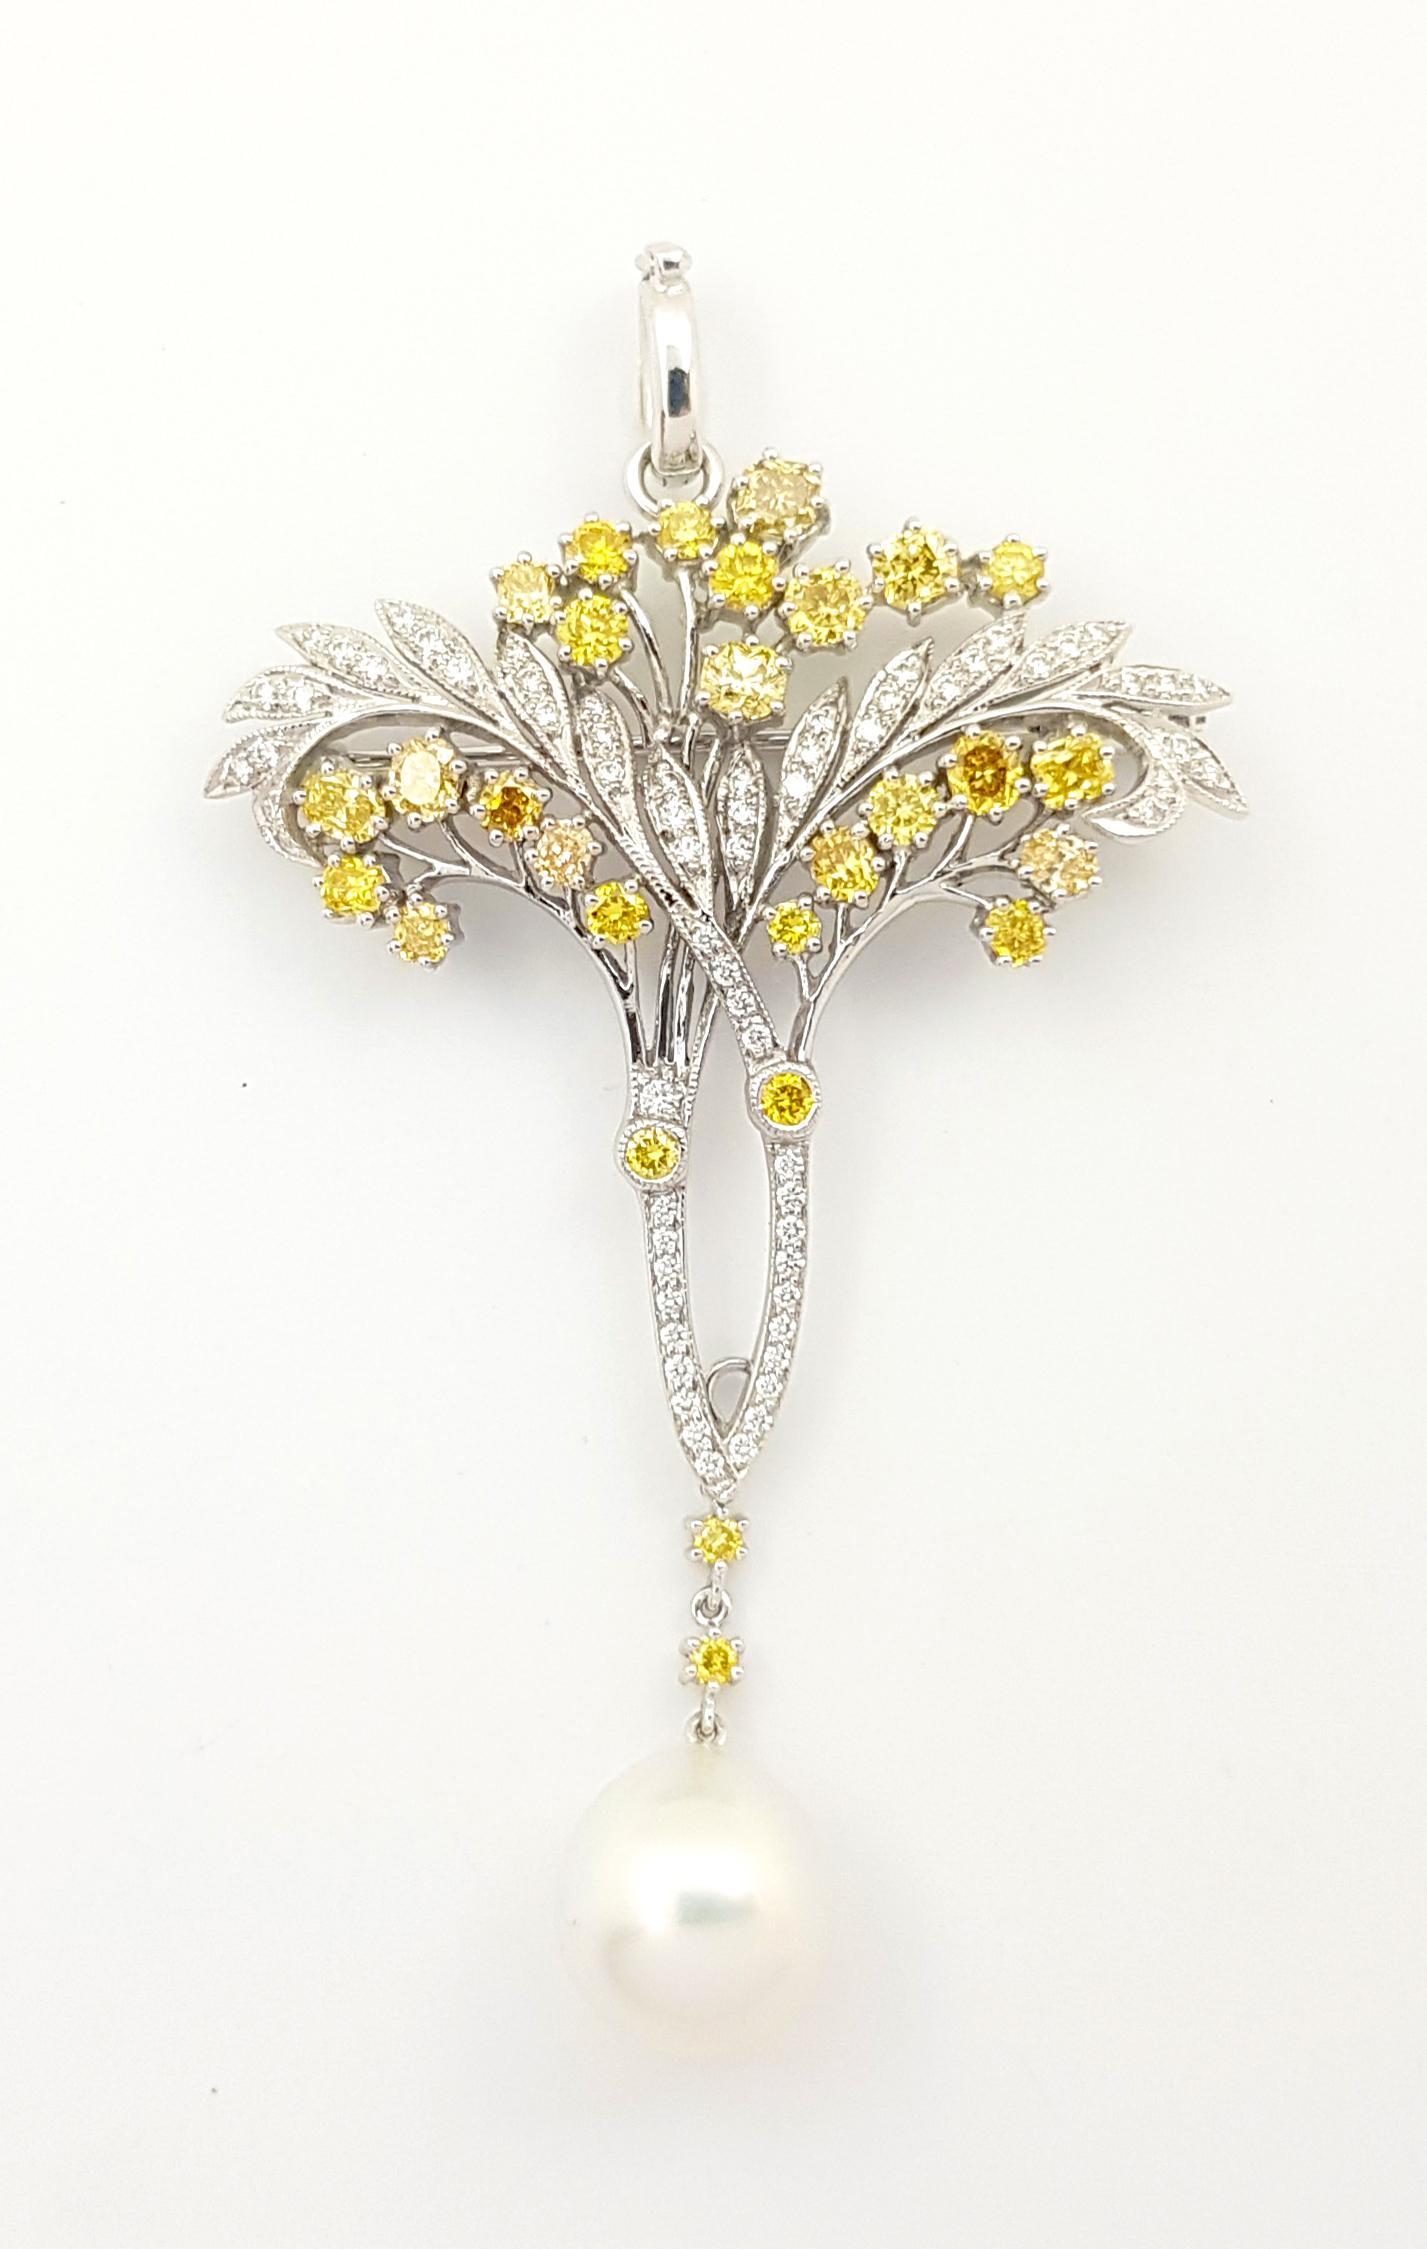 South Sea Pearl, Yellow Diamond 2.44 carats and Diamond 0.40 carat Brooch/Pendant set in 18K White Gold Settings
(chain not included)

Width: 4.0 cm 
Length: 7.0 cm
Total Weight: 11.28 grams

South Sea Pearl approx. 10mm

